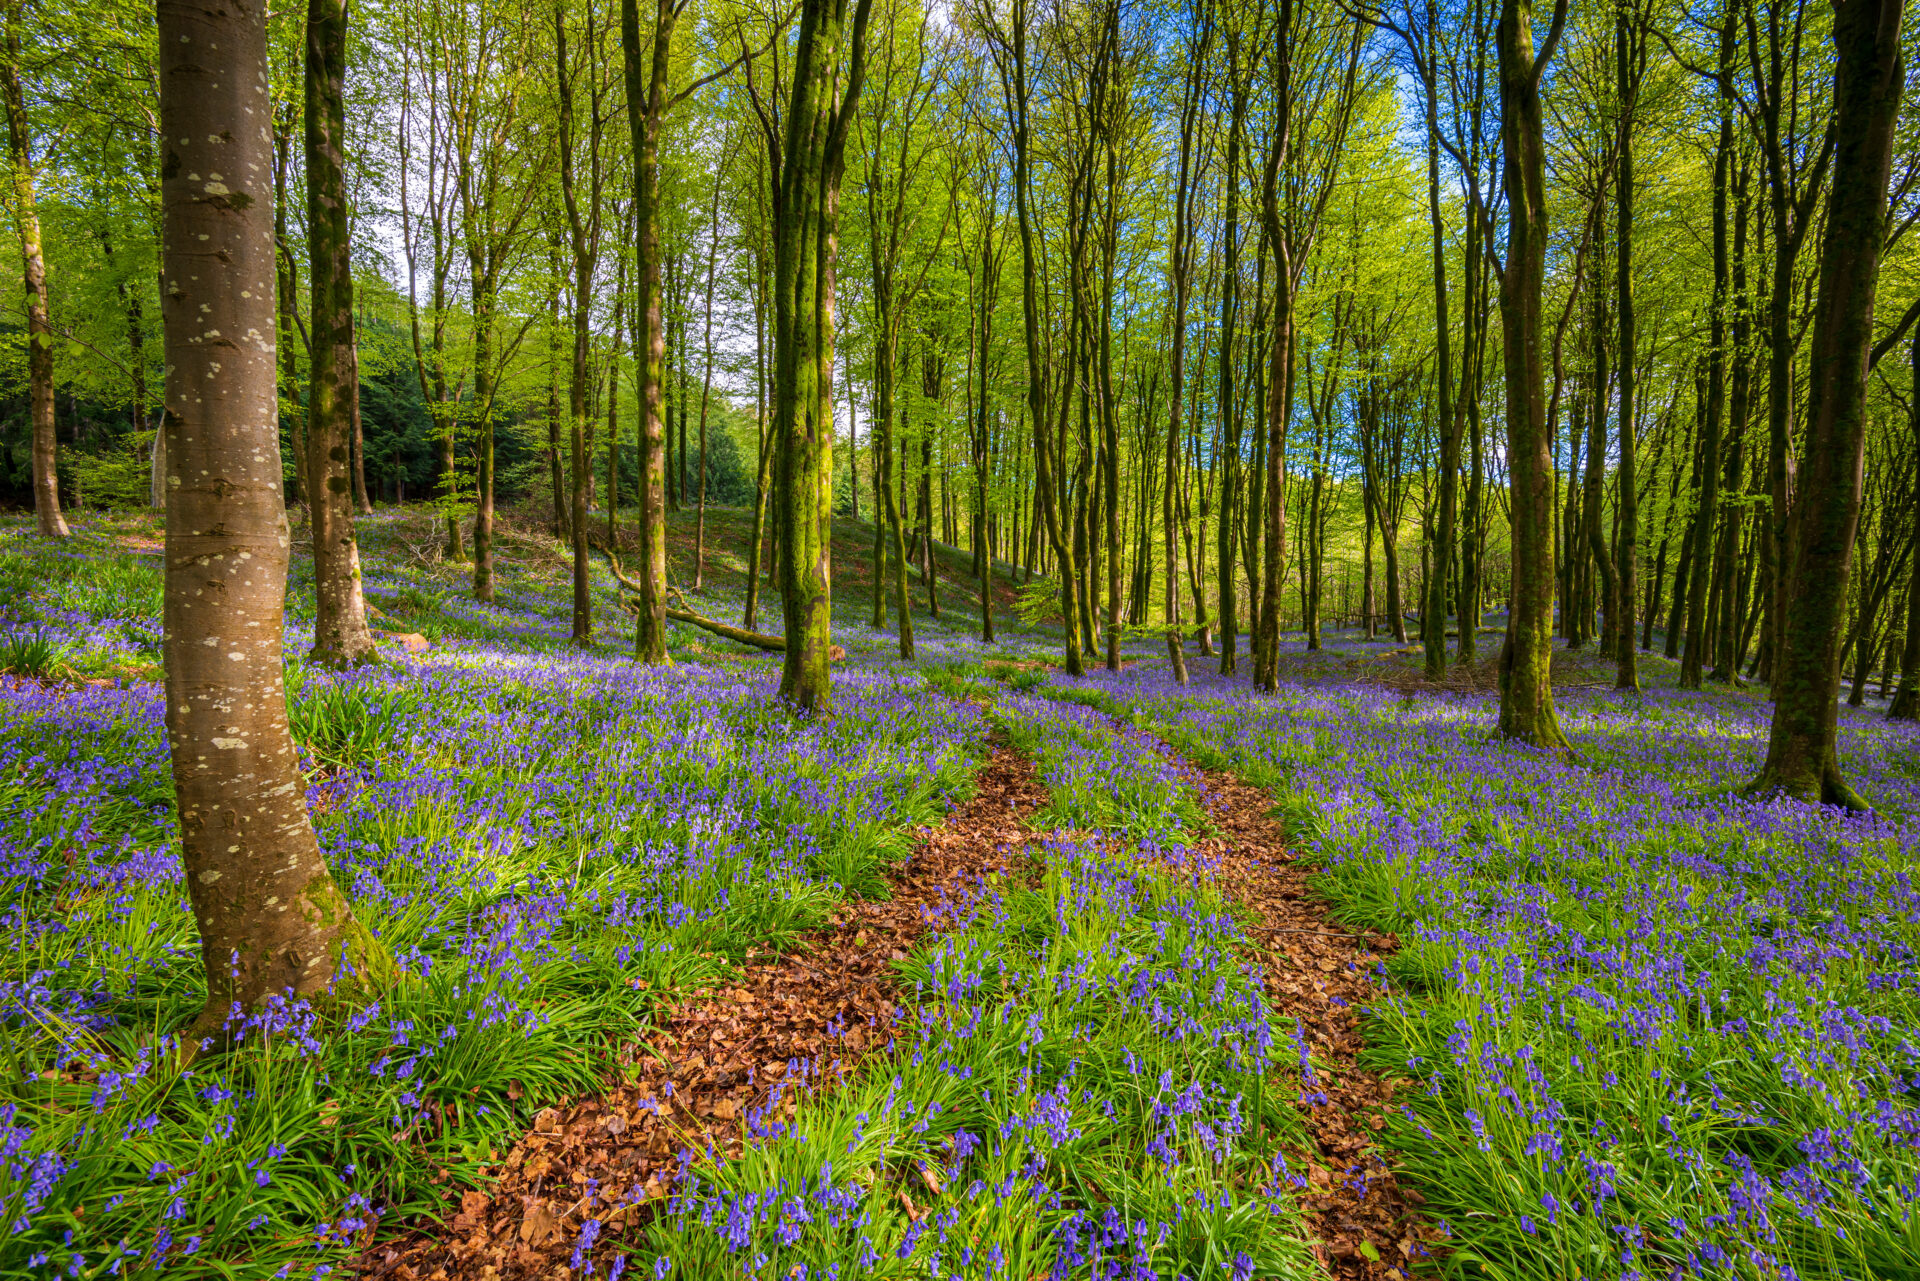 Bluebells carpet woodland in Dorset with sun shining through the beech and birch canopy of bright green leaves contrasting with the blue and purple of the bluebell flowers